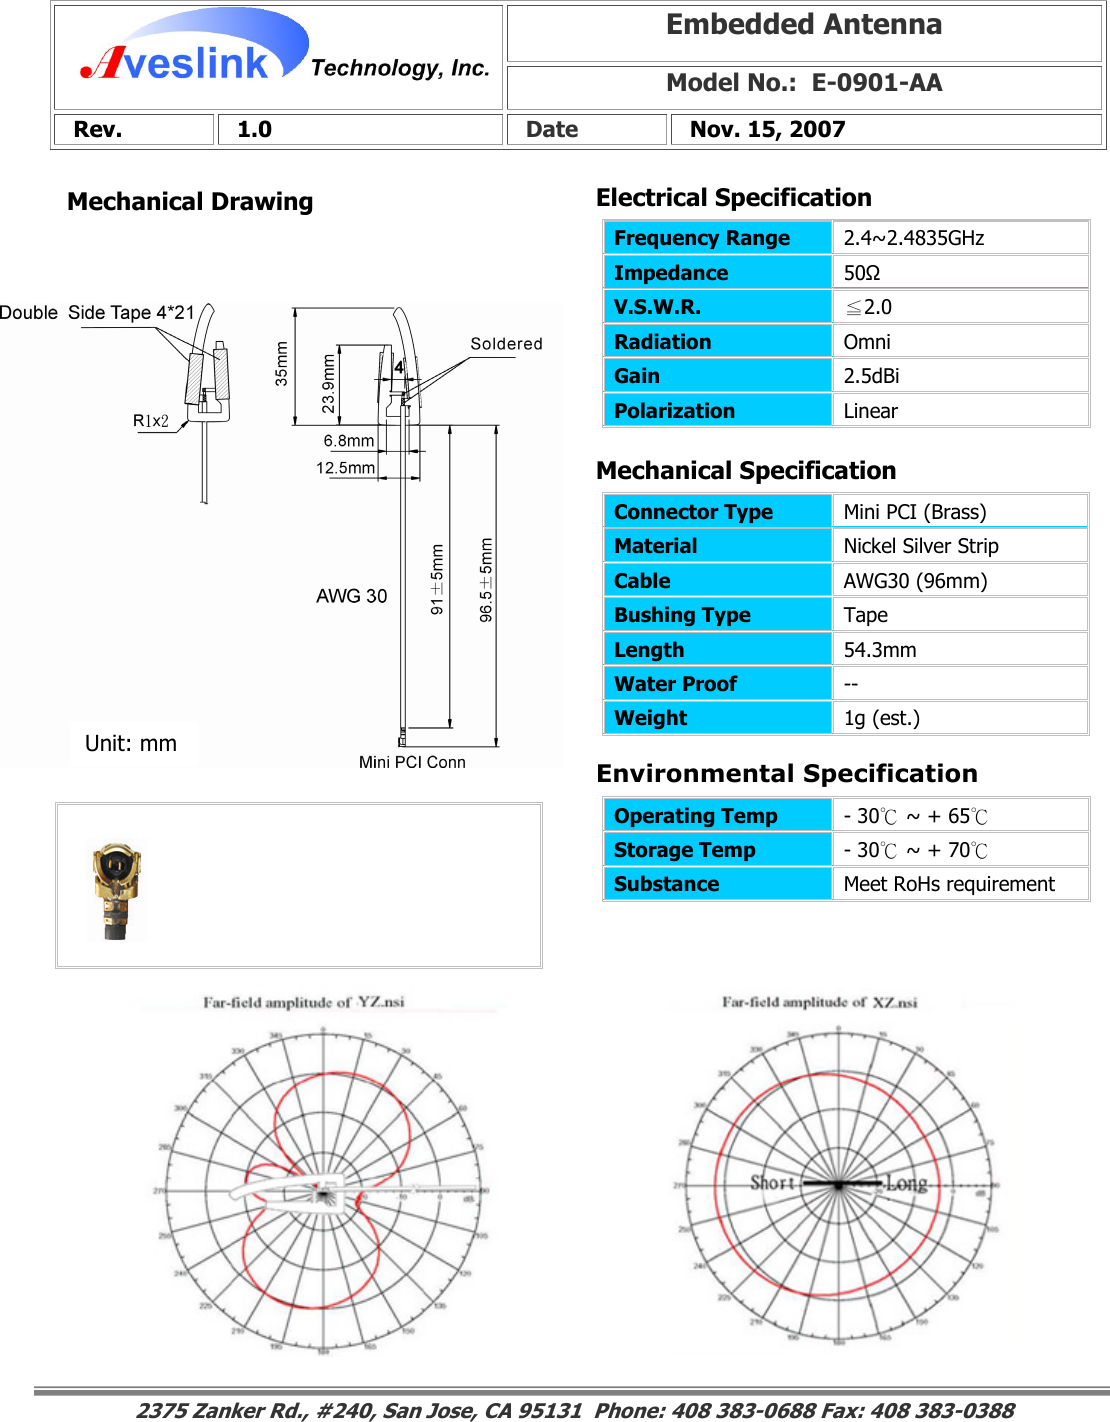 Mechanical DrawingEmbedded Antenna Model No.:  E-0901-AA  Rev.   1.0   Date   Nov. 15, 2007                                                                                                                                                                                                                        Mechanical Specification 2375 Zanker Rd., #240, San Jose, CA 95131  Phone: 408 383-0688 Fax: 408 383-0388 Operating Temp  - 30℃ ~ + 65℃  Storage Temp  - 30℃ ~ + 70℃  Substance  Meet RoHs requirement Electrical SpecificationFrequency Range   2.4~2.4835GHz Impedance  50Ω V.S.W.R.  ≦2.0 Radiation  Omni Gain  2.5dBi Polarization  Linear Connector Type   Mini PCI (Brass) Material  Nickel Silver Strip Cable  AWG30 (96mm) Bushing Type  Tape Length  54.3mm Water Proof  -- Weight  1g (est.) Unit: mm Environmental Specification